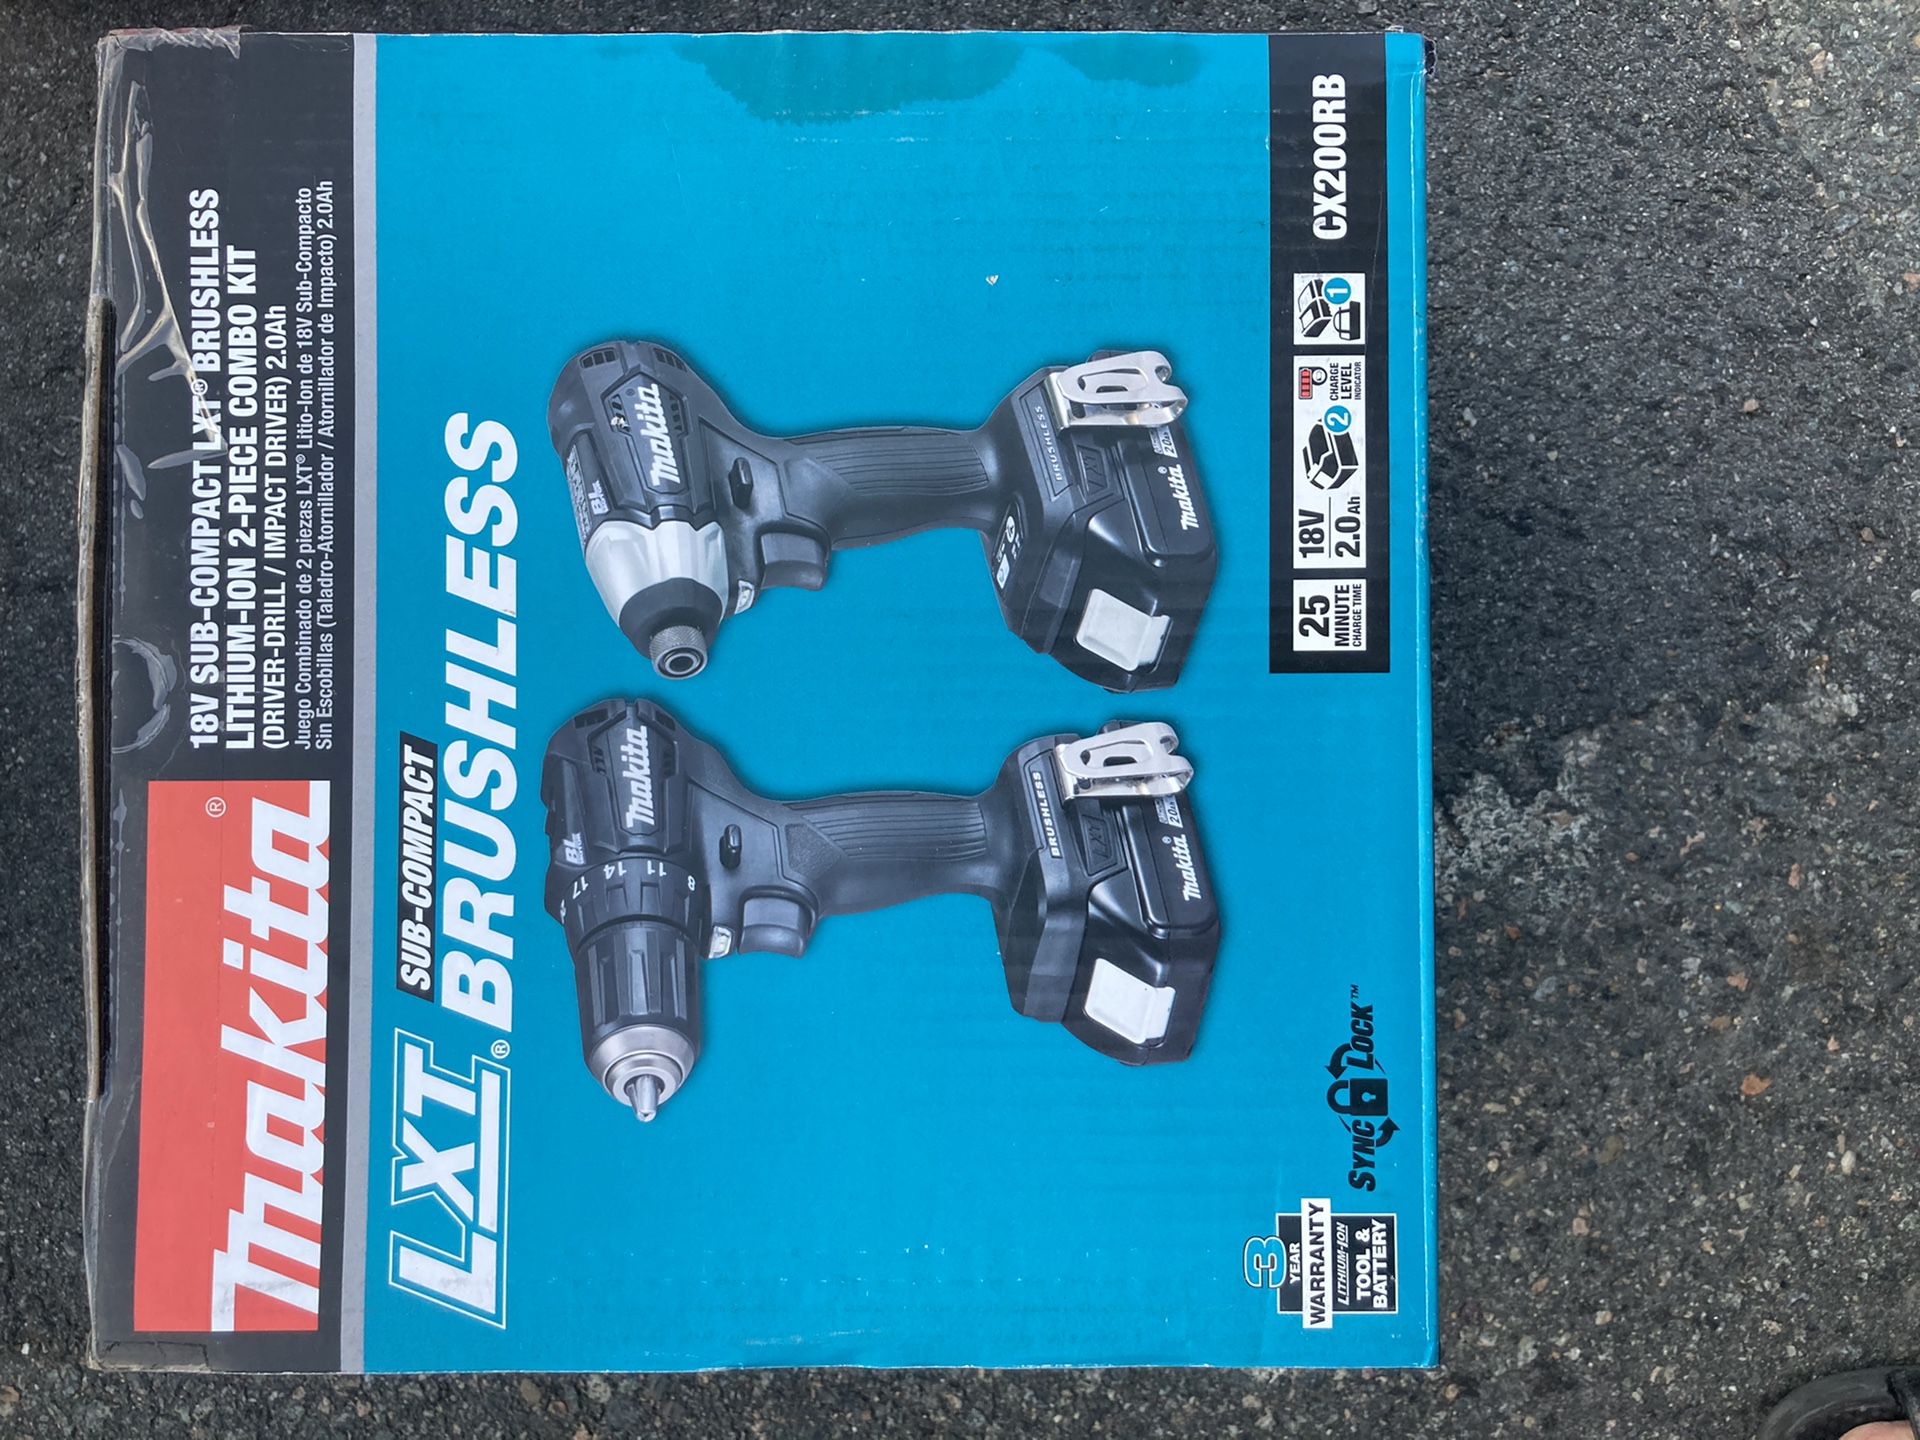 Brand New Makita Brushless 2-Piece Combo Kit Two 2.0Ah batteries, Charger and bag included